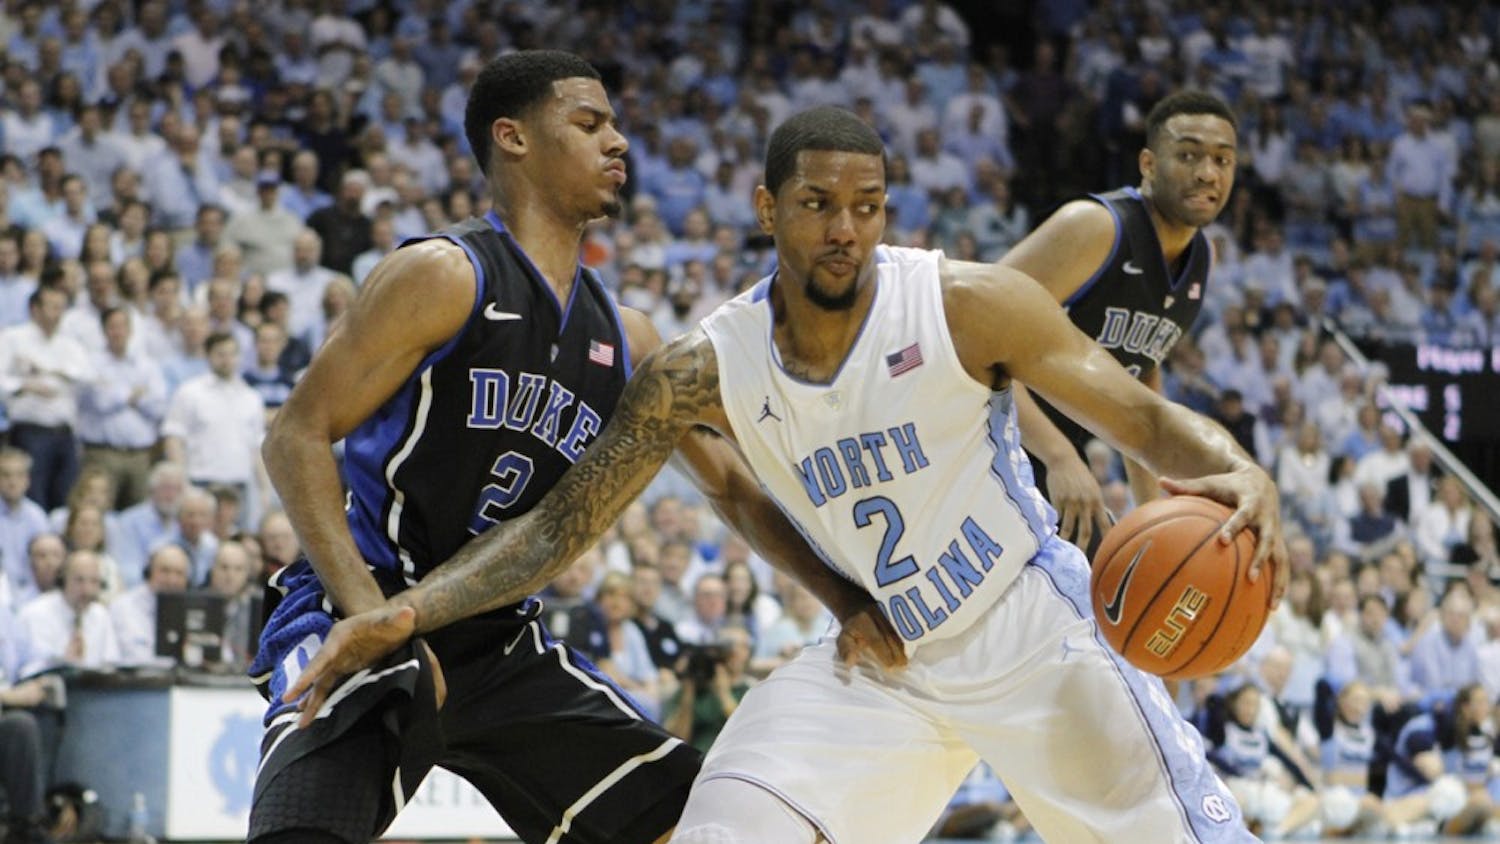 Leslie McDonald drives to the basket. UNC defeated Duke 74-66 at the Smith Center on Thursday, Feb. 20, 2014.&nbsp;